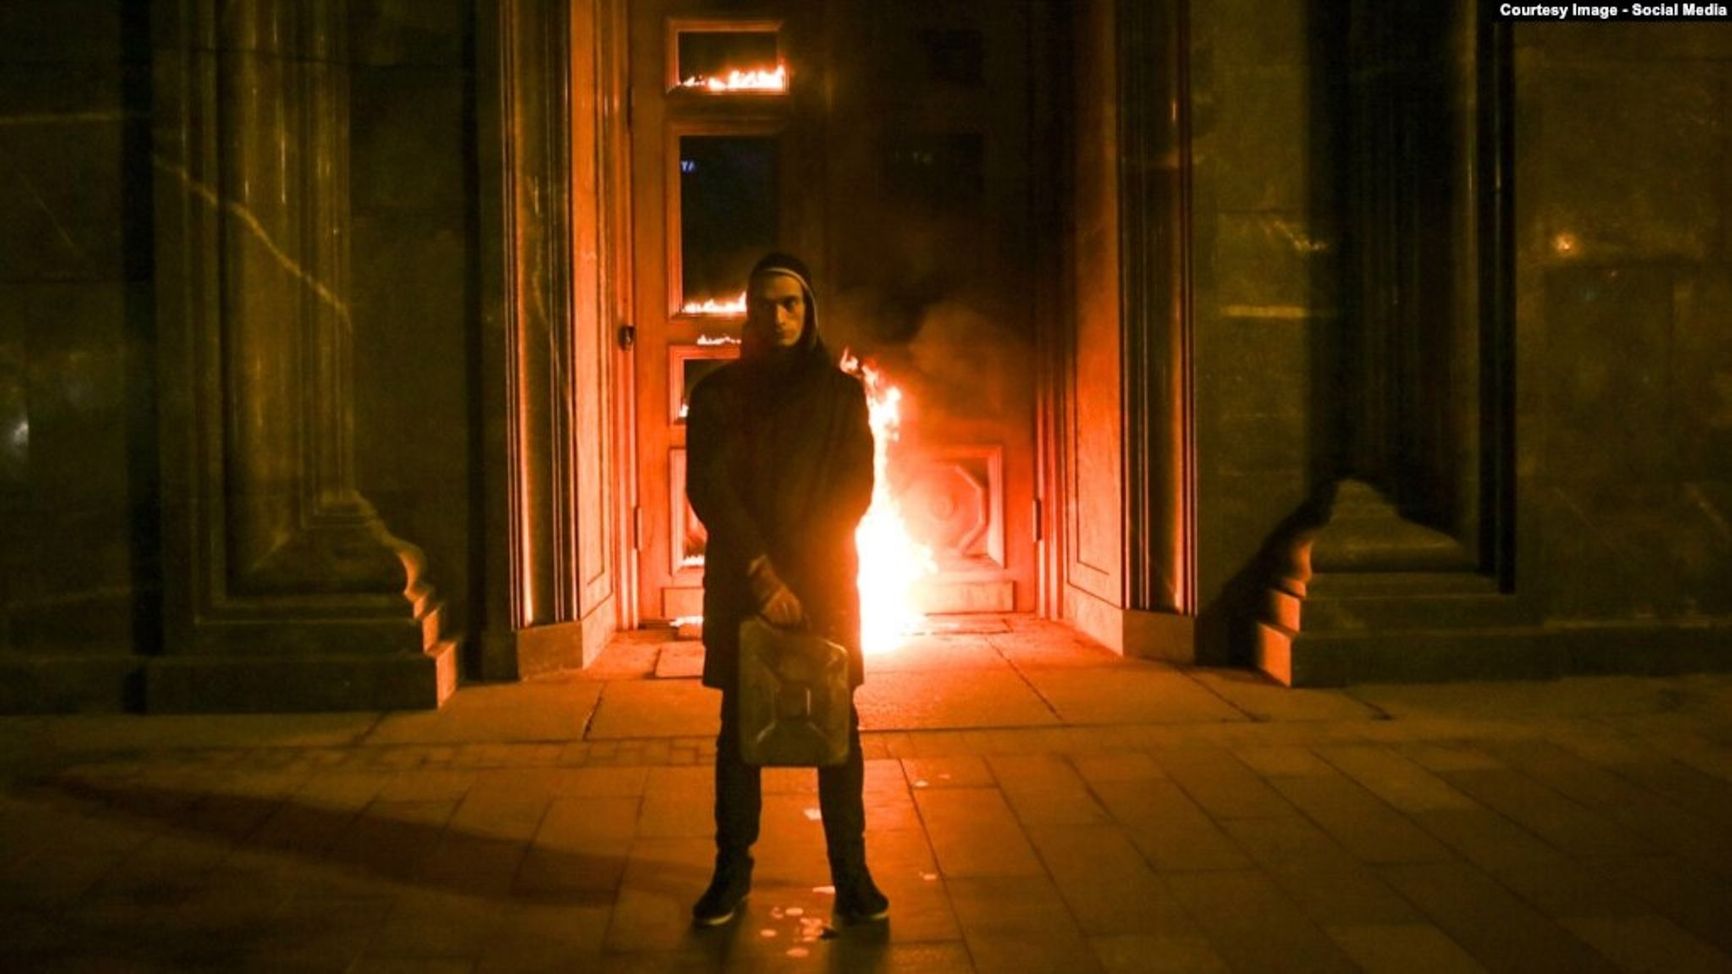 Artist Pyotr Pavlensky in front of the burning entrance to the main building of the Russian Federal Security Service. “The Threat” performance